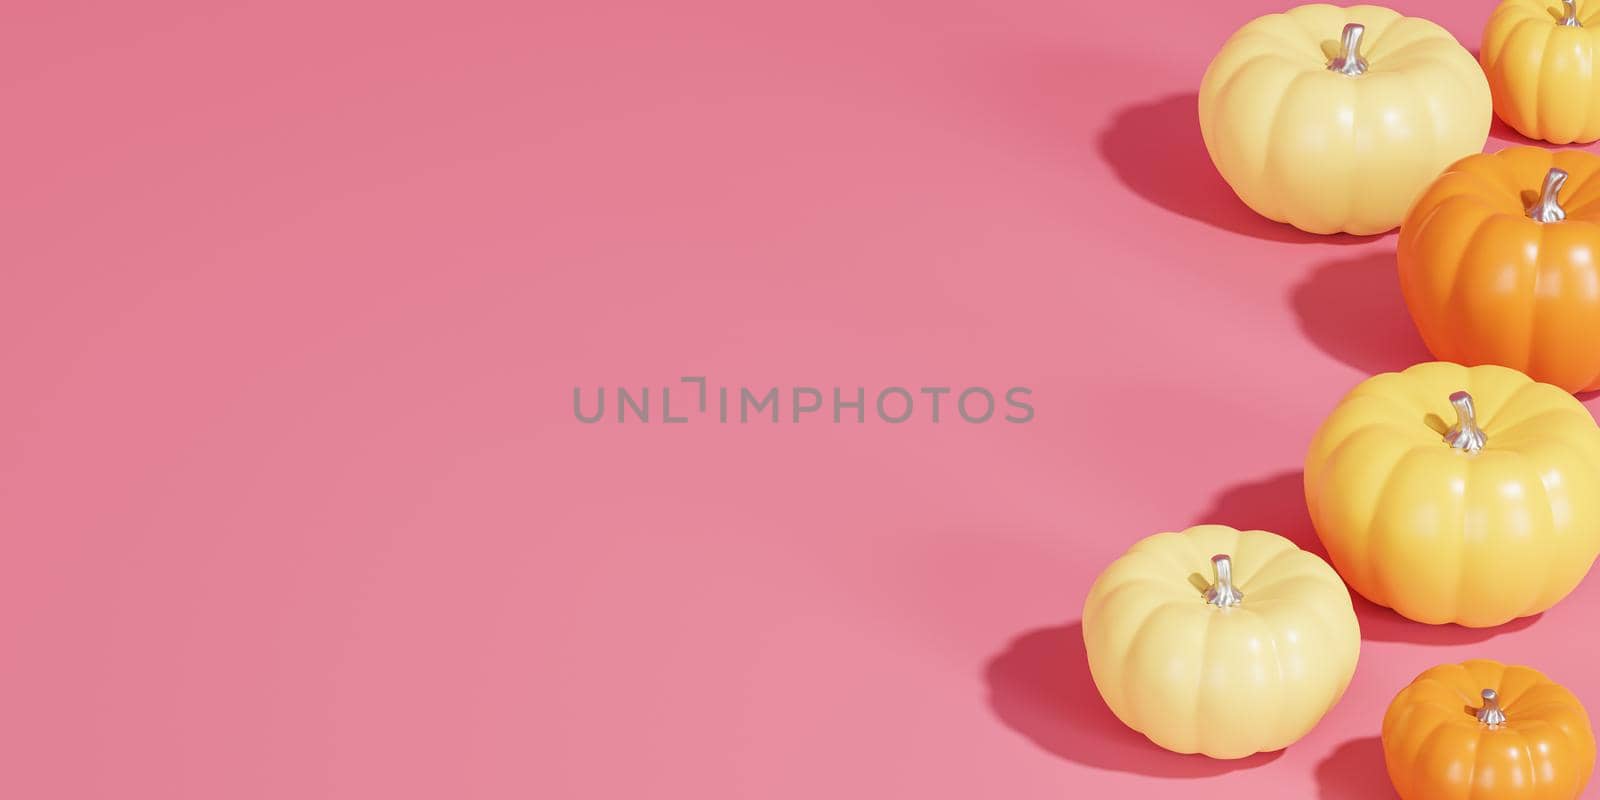 Pumpkins on pink minimal background for advertising on autumn holidays or sales, copy space, 3d render banner by Frostroomhead